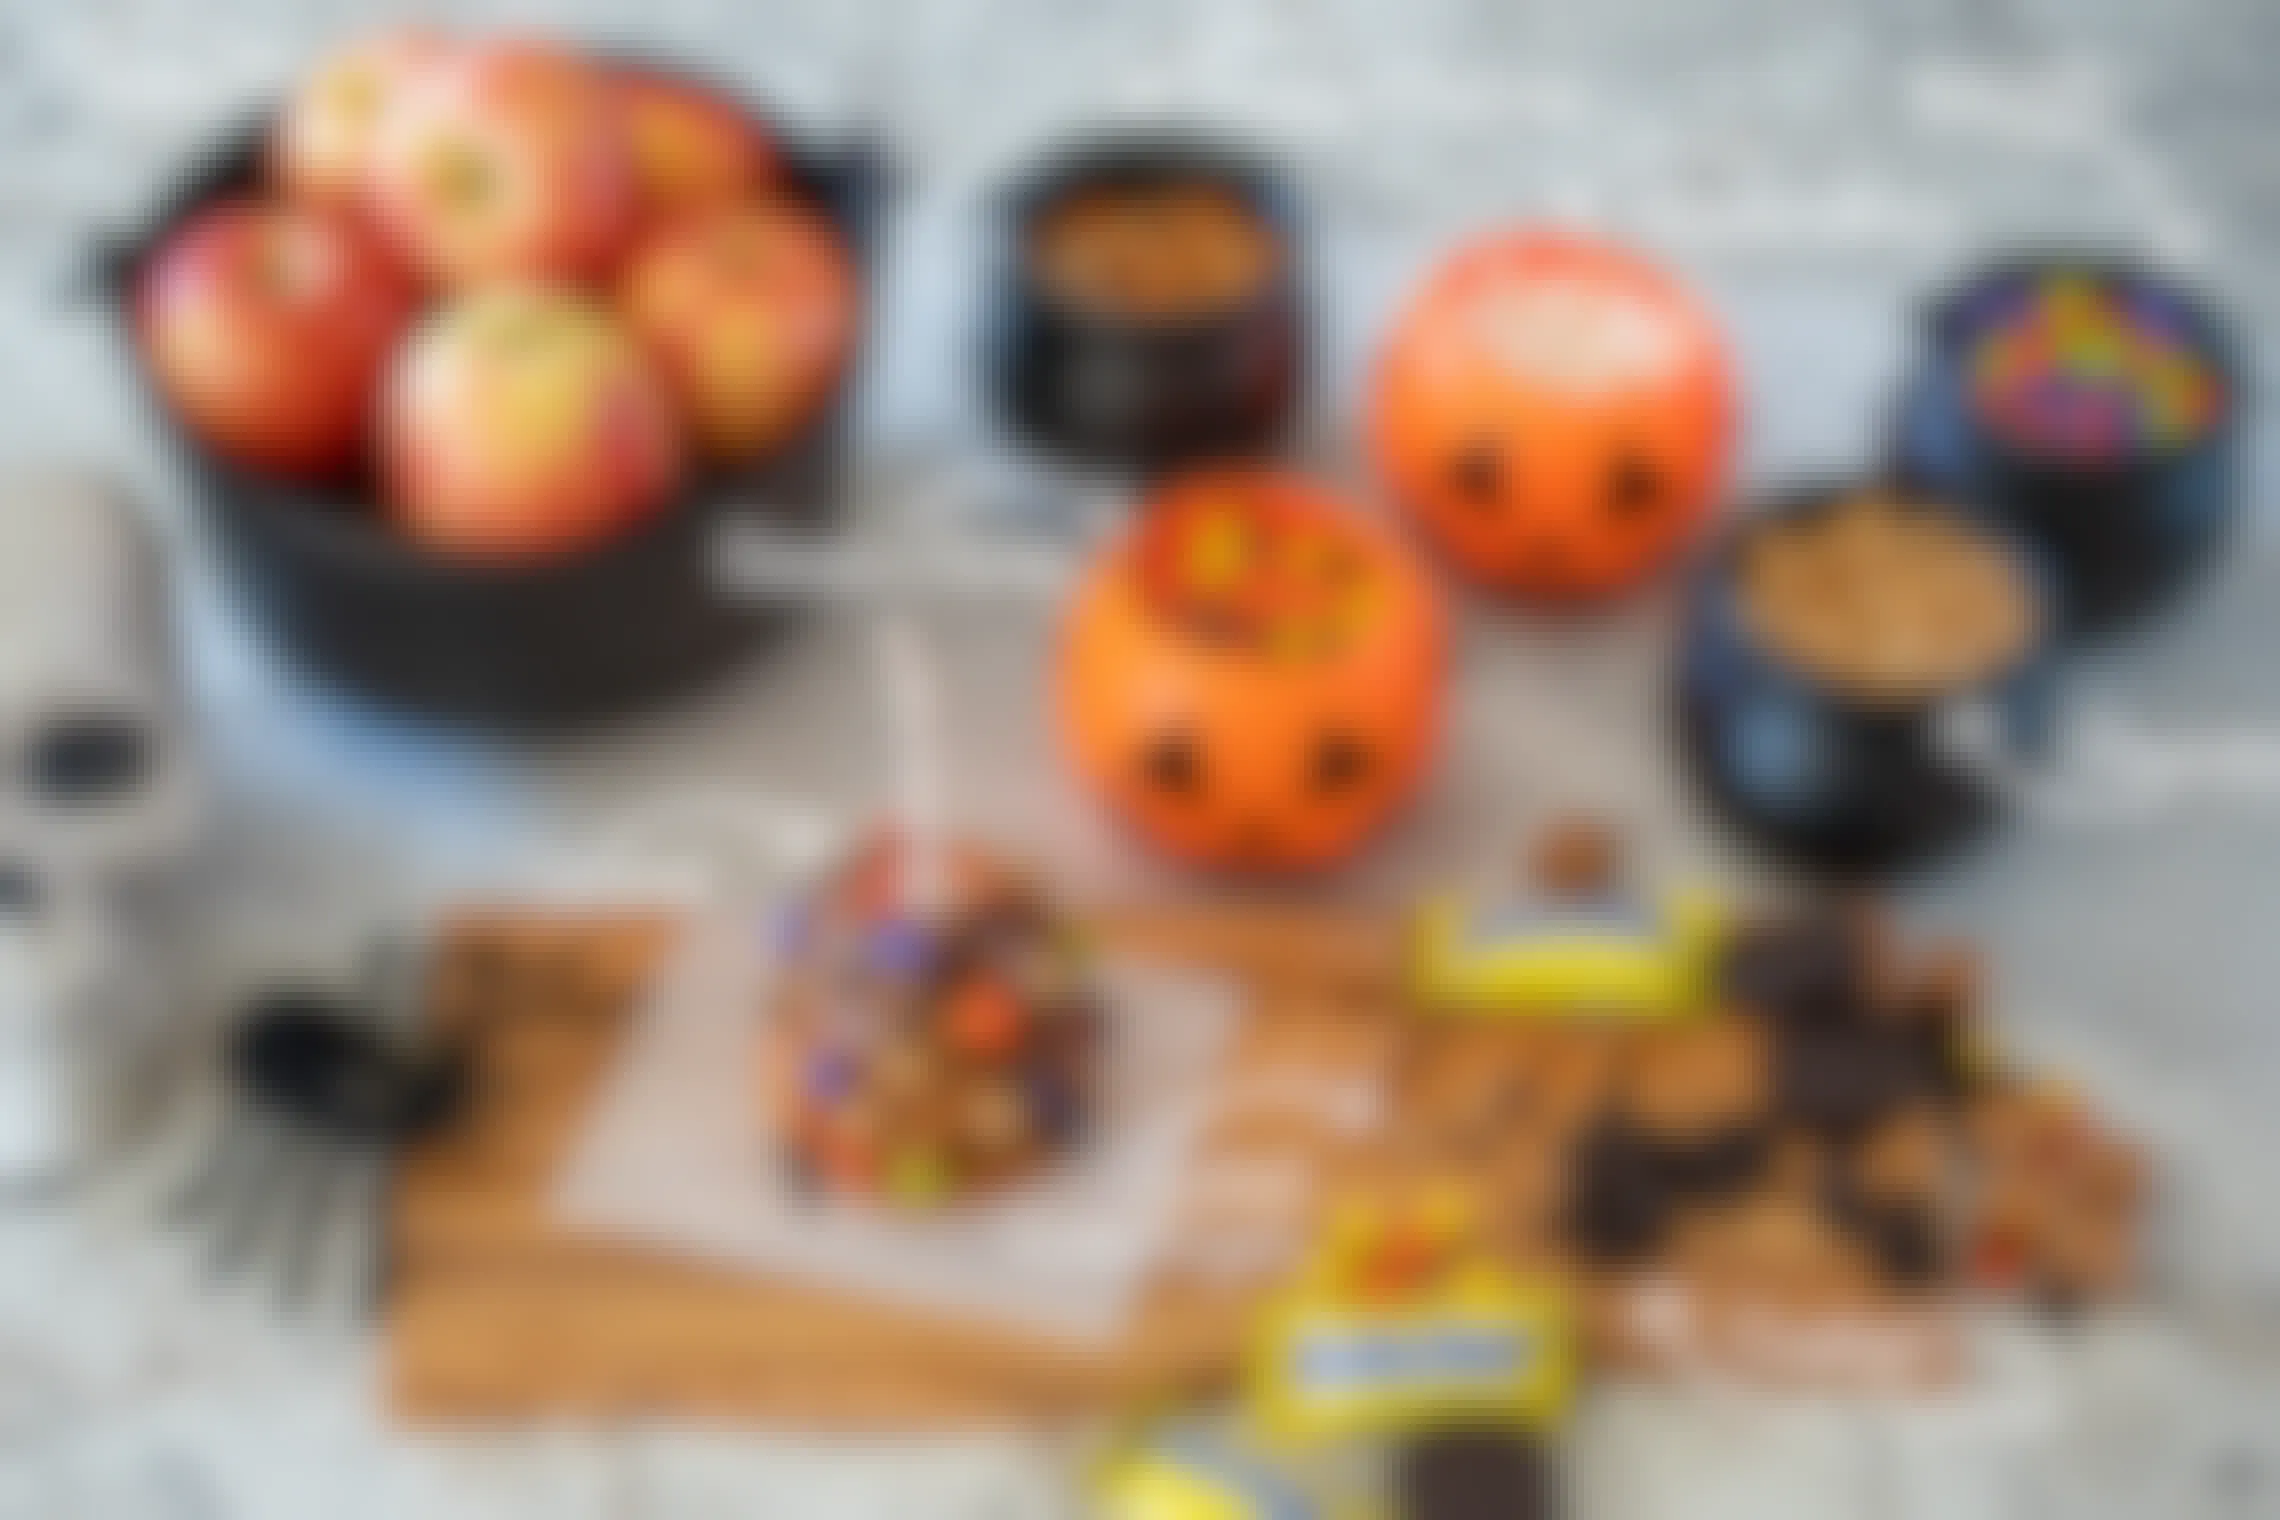 Caramel apple, apples, and candy in a small plastic cauldrons and pumpkins.